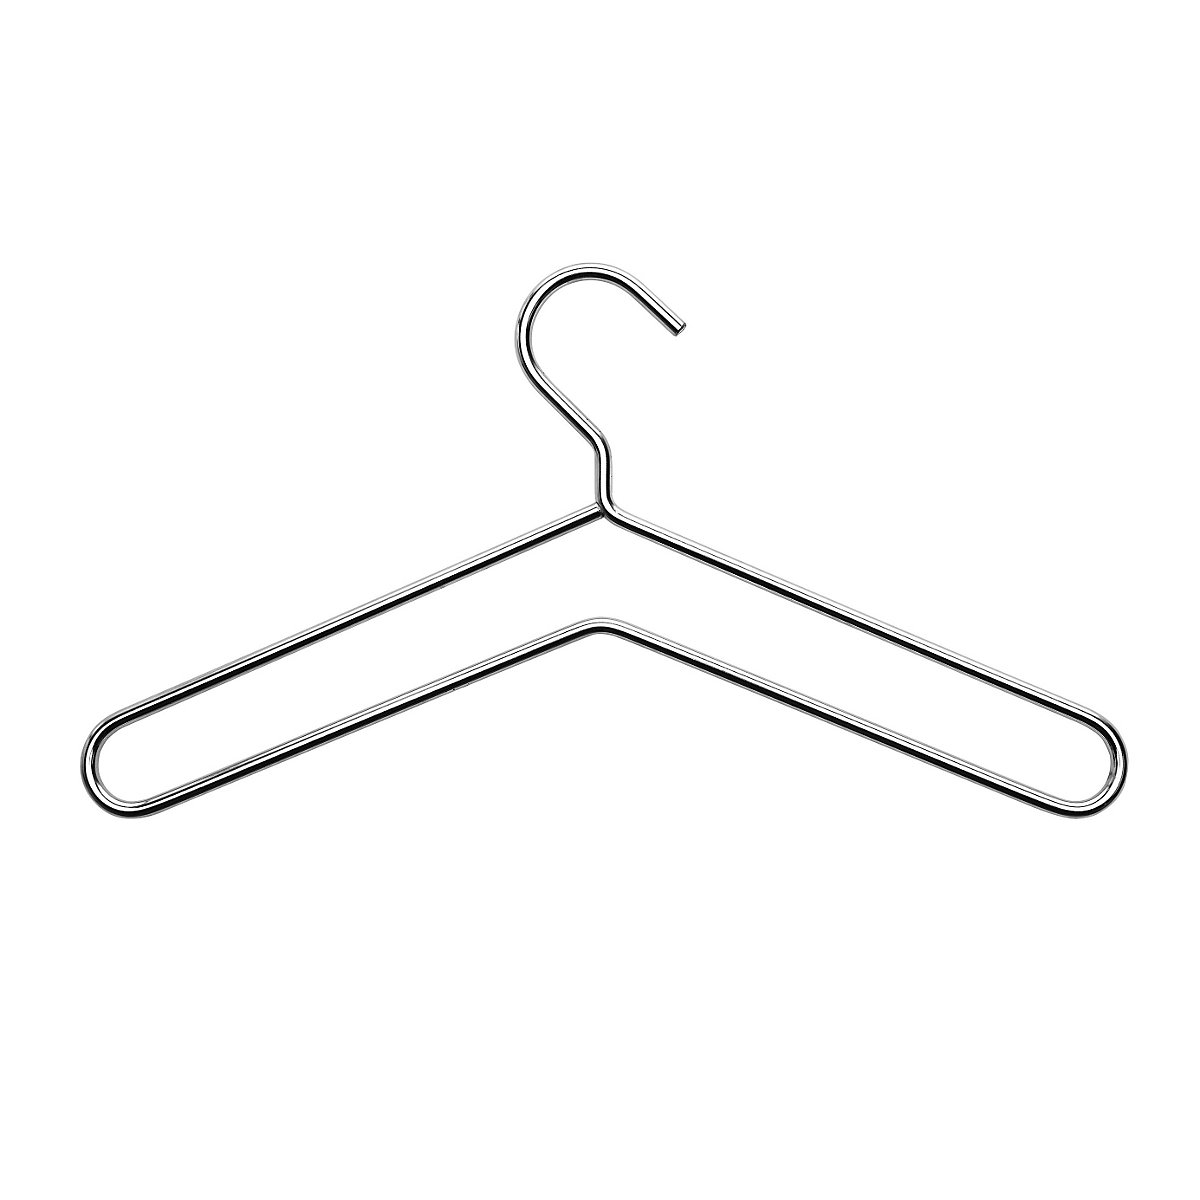 https://images.kkeu.de/is/image/BEG/Accessories_office/Additional_accessory_products/Coat_hanger_pdplarge-mrd--000025157717_PRD_org_all.jpg